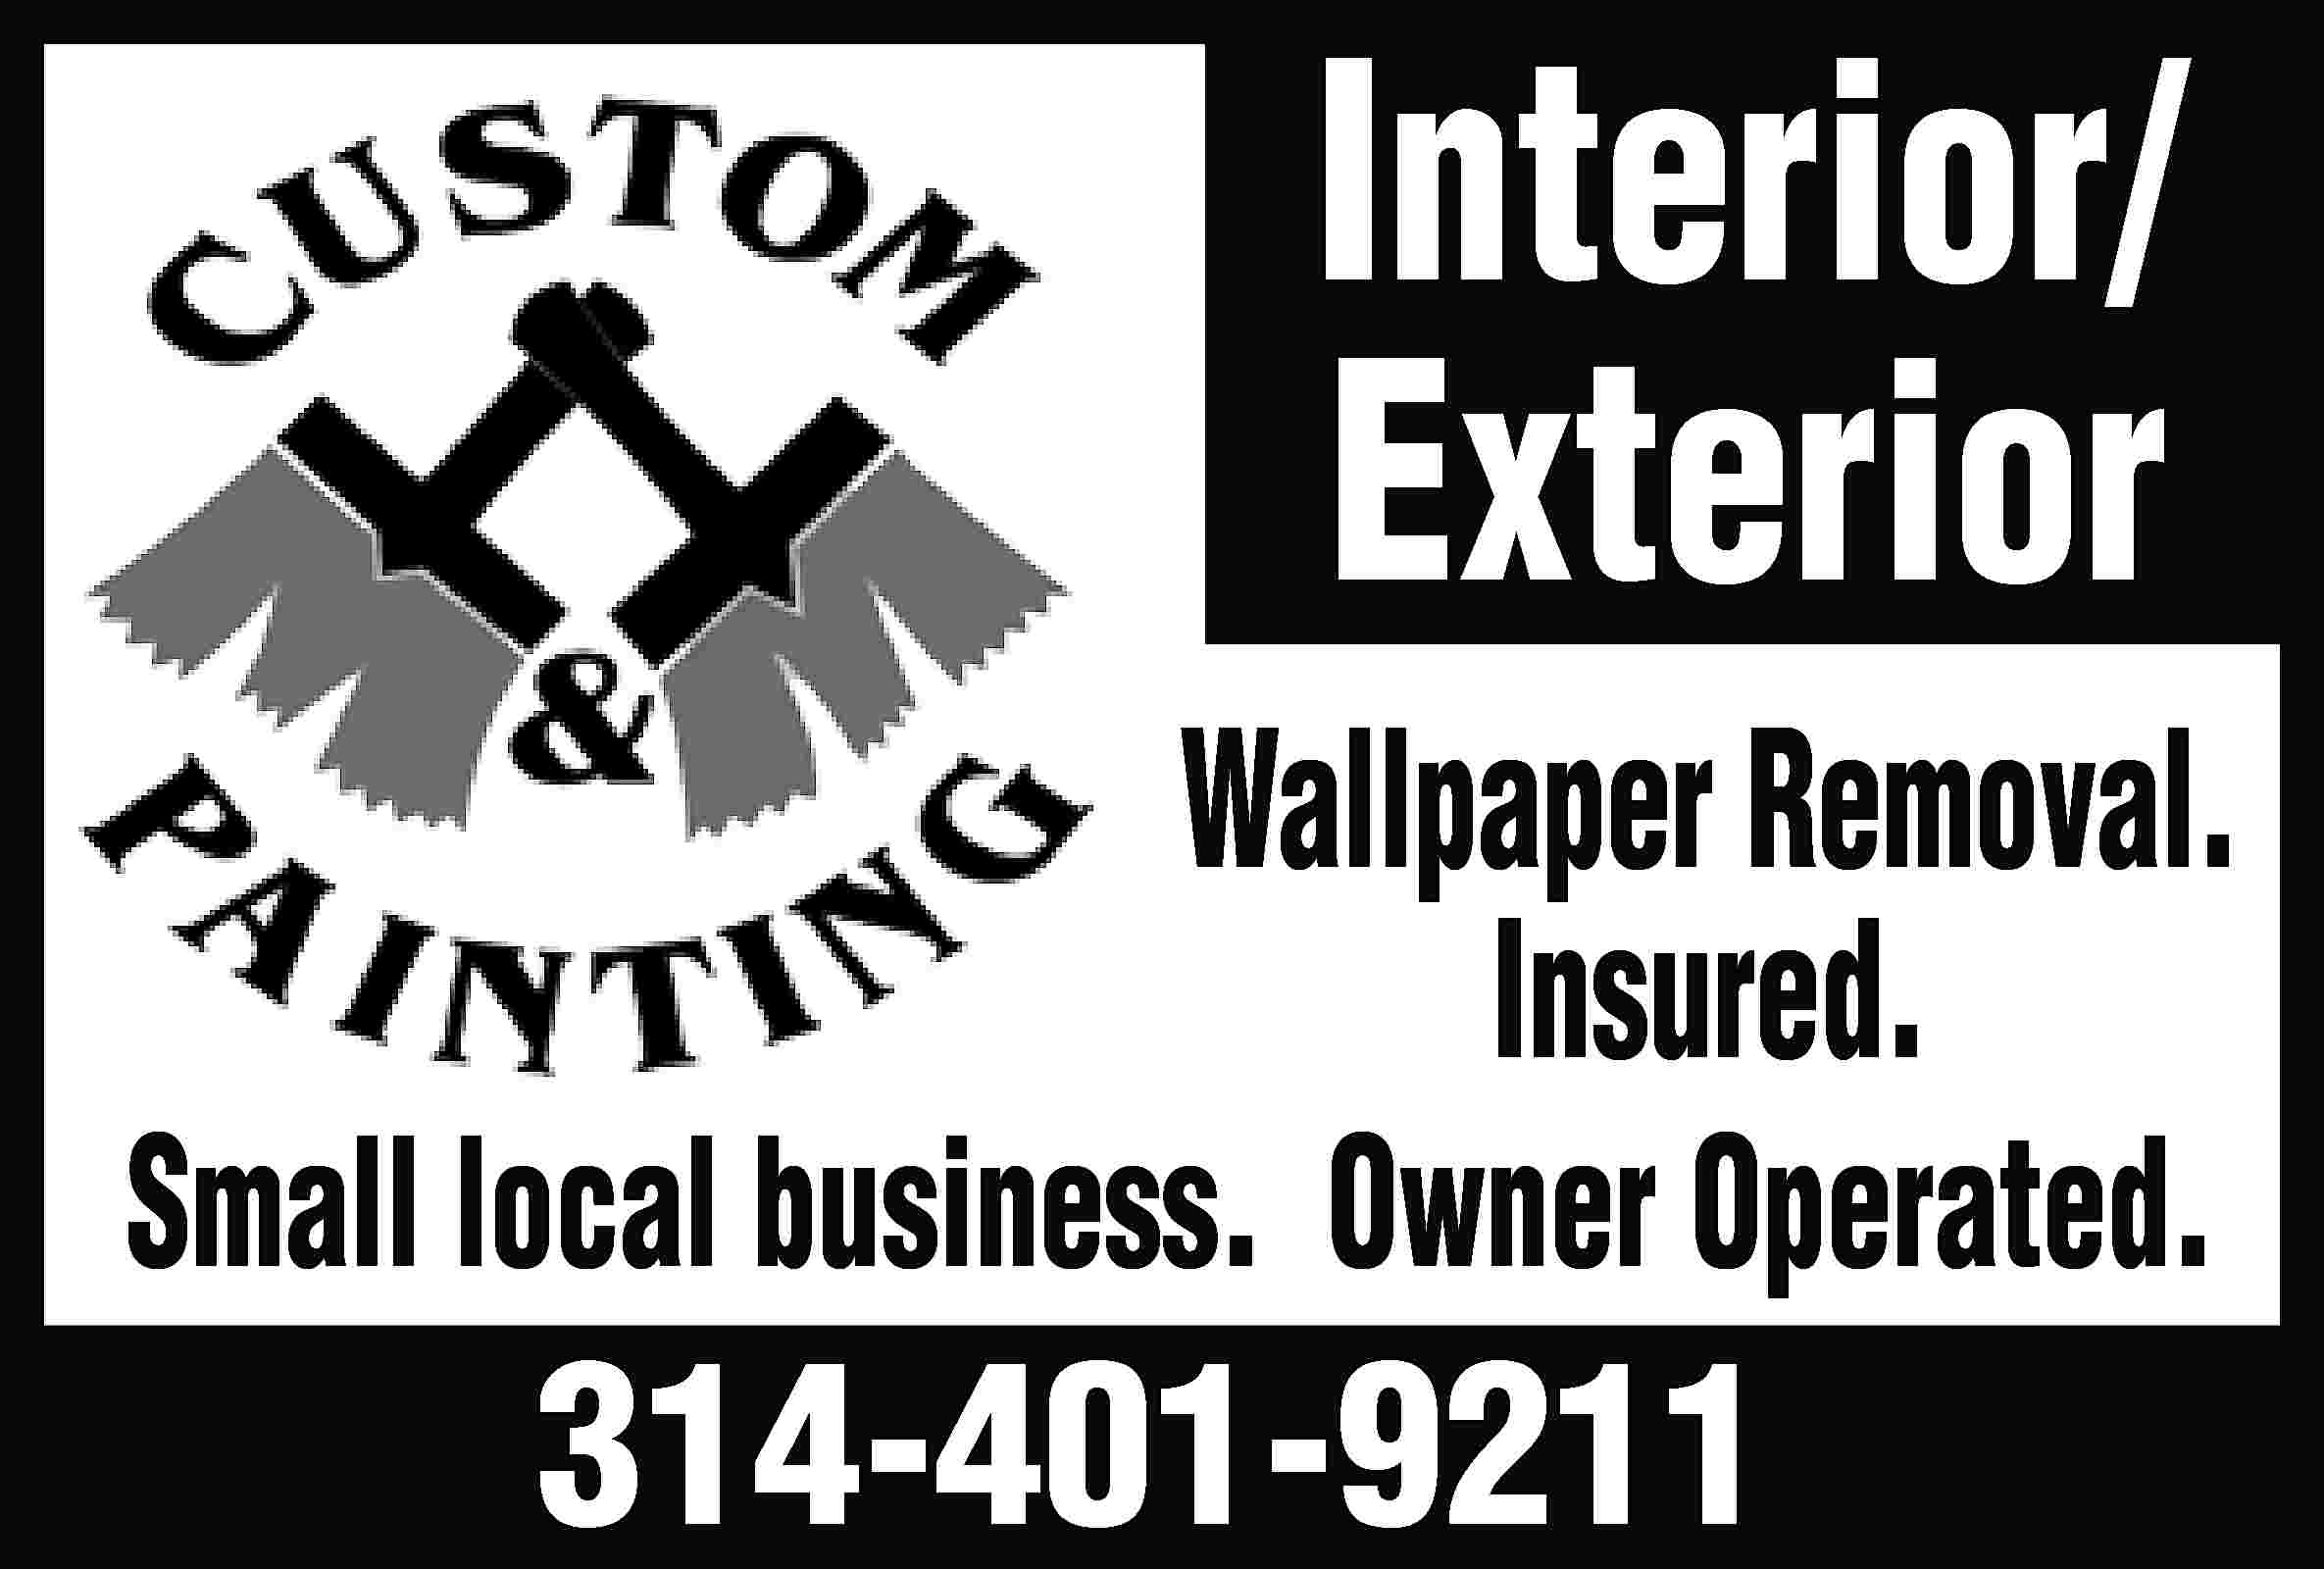 Interior/ Exterior Wallpaper Removal. Insured.  Interior/ Exterior Wallpaper Removal. Insured. Small local business. Owner Operated. 314-401-9211